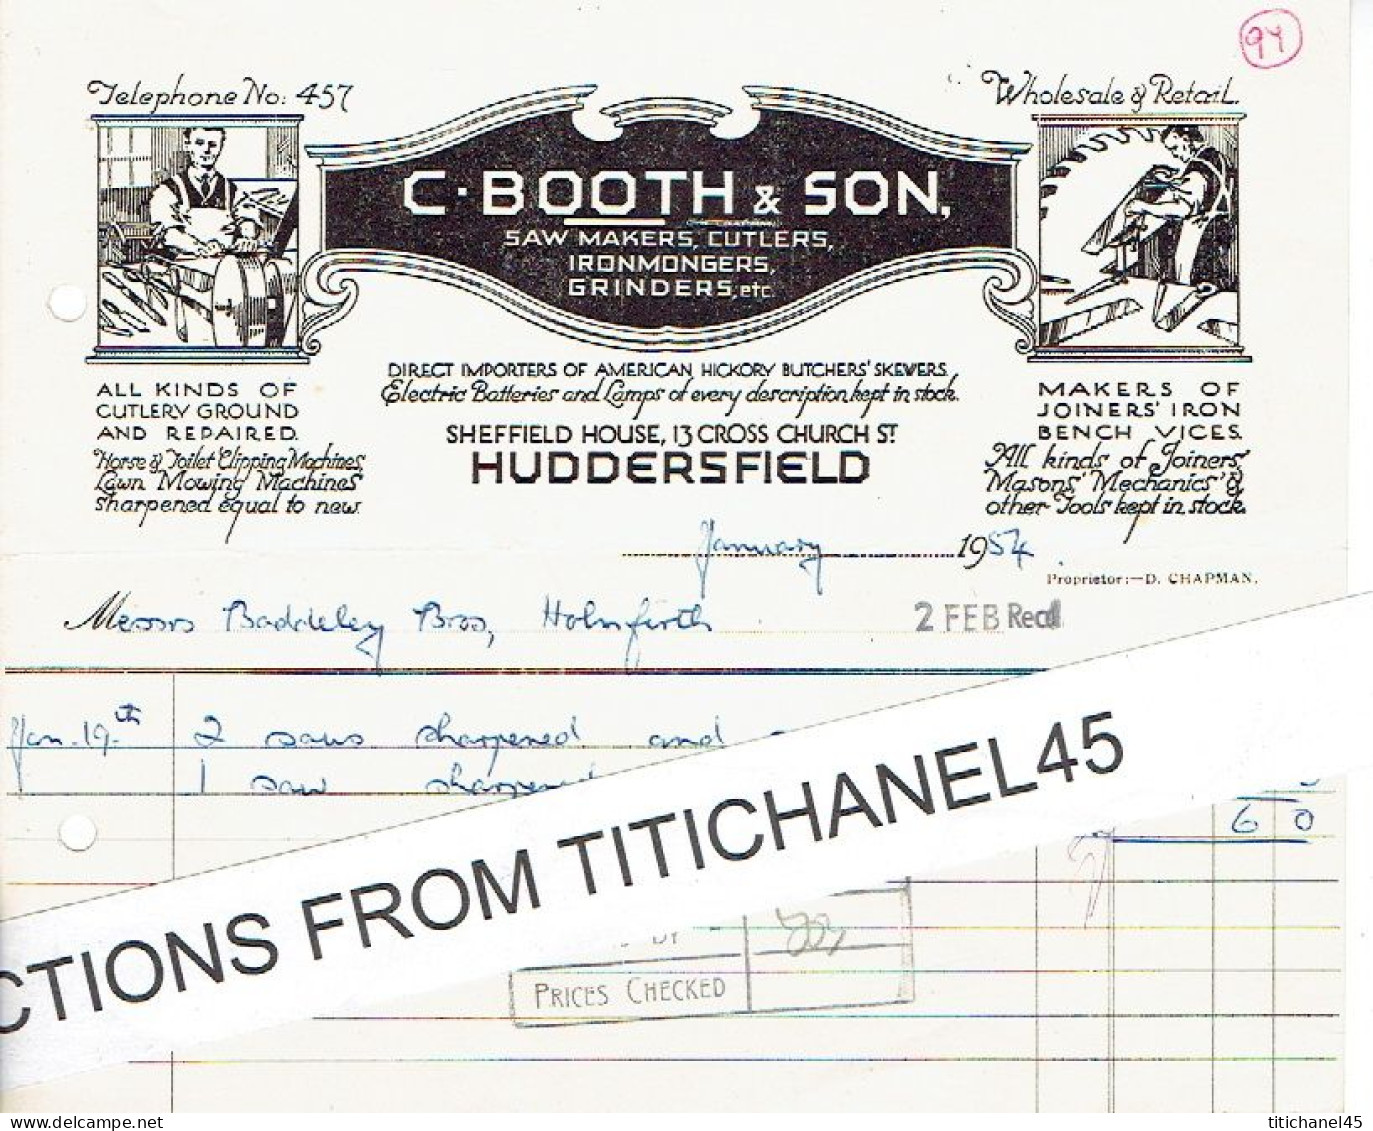 1954 HUDDERSFIELD - Invoice From C. BOOTH & SON - Saw Makers, Cutlers, Ironmongers, Grinders... - Ver. Königreich